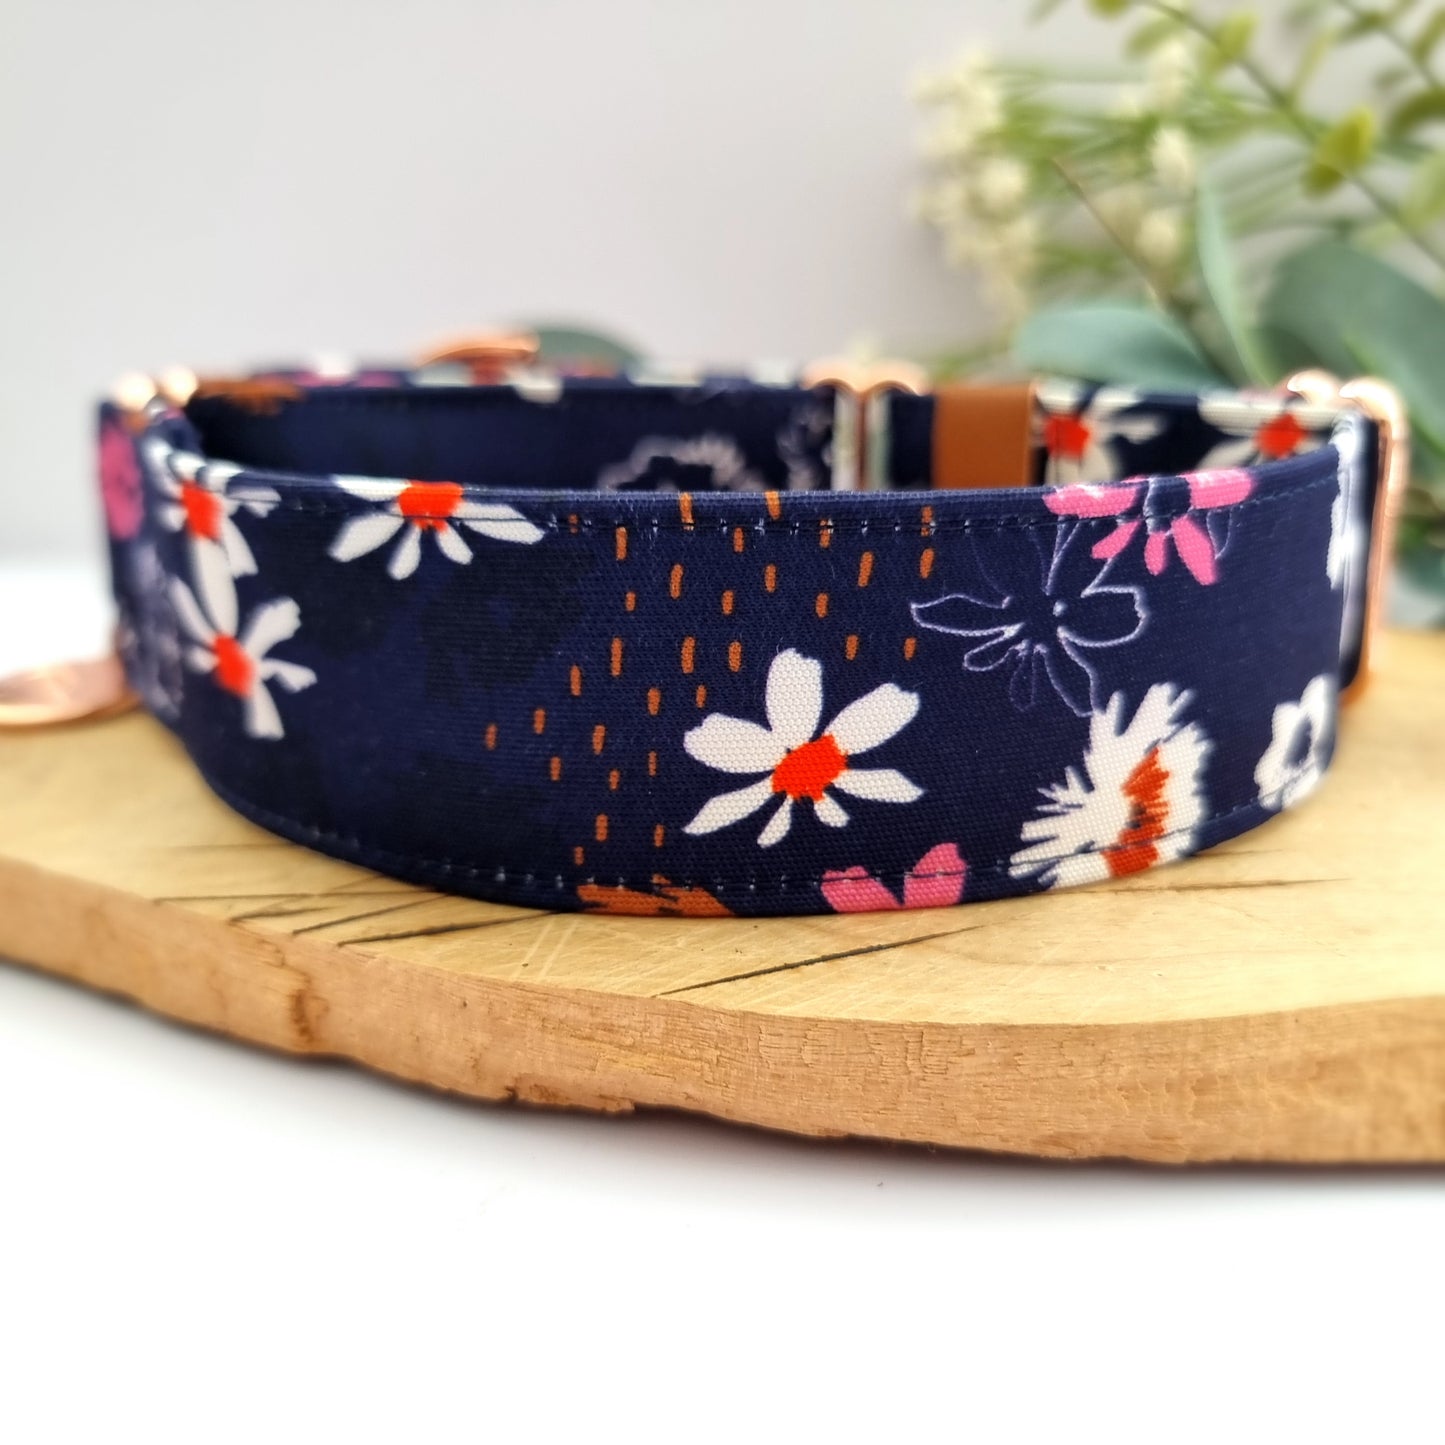 Lola Floral martingale collar - Water resistant